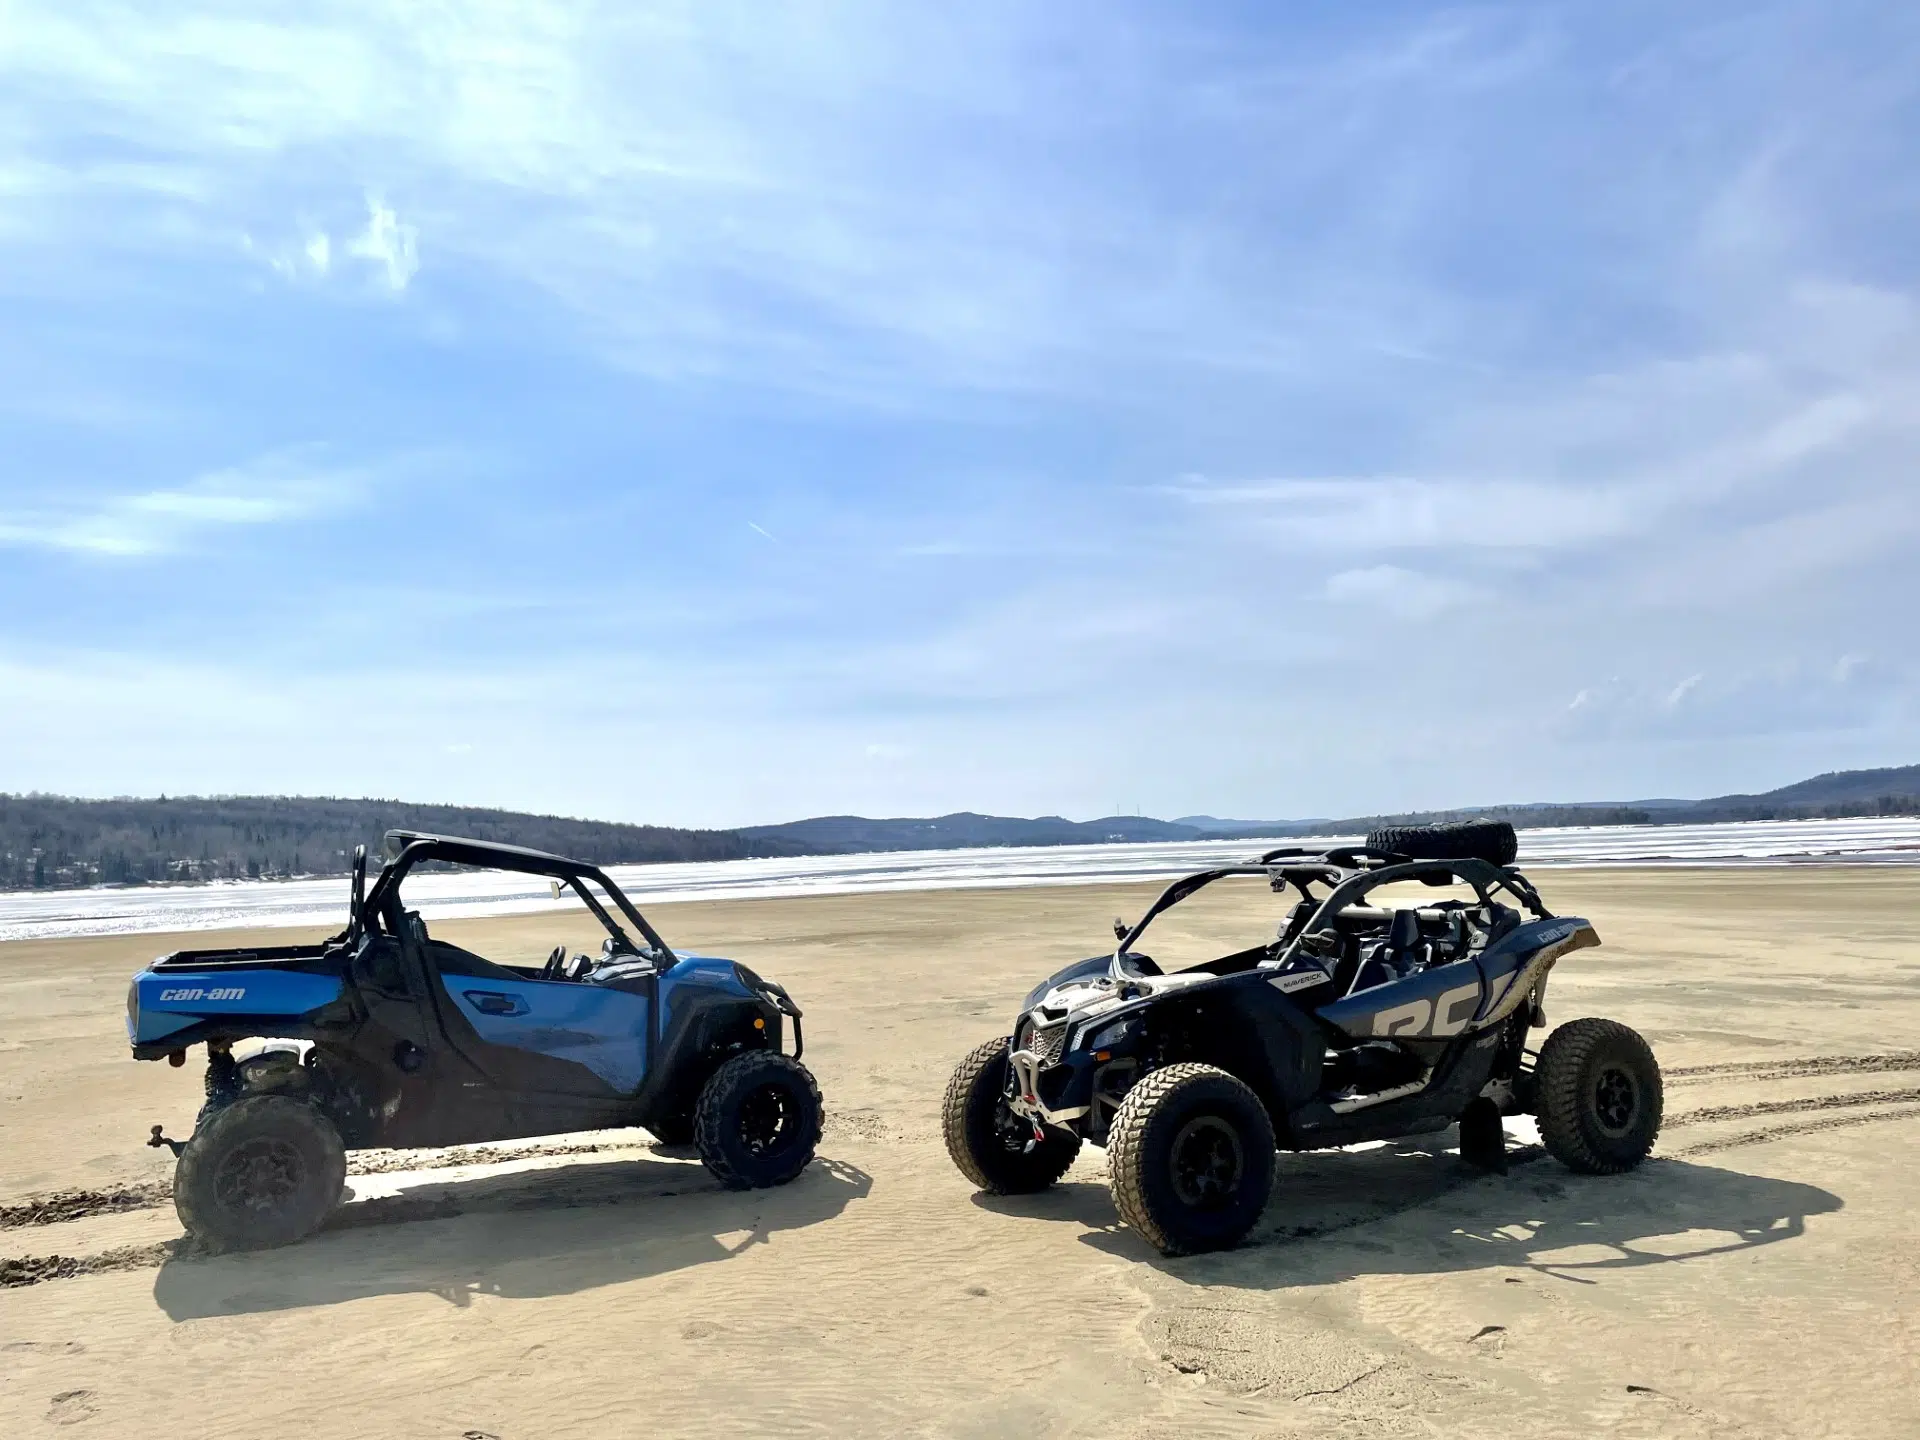 Can-Am Commander and Can-Am Maverick X3 2023. Times have changed, to the delight of drivers! photo credit: @lapointe.sports